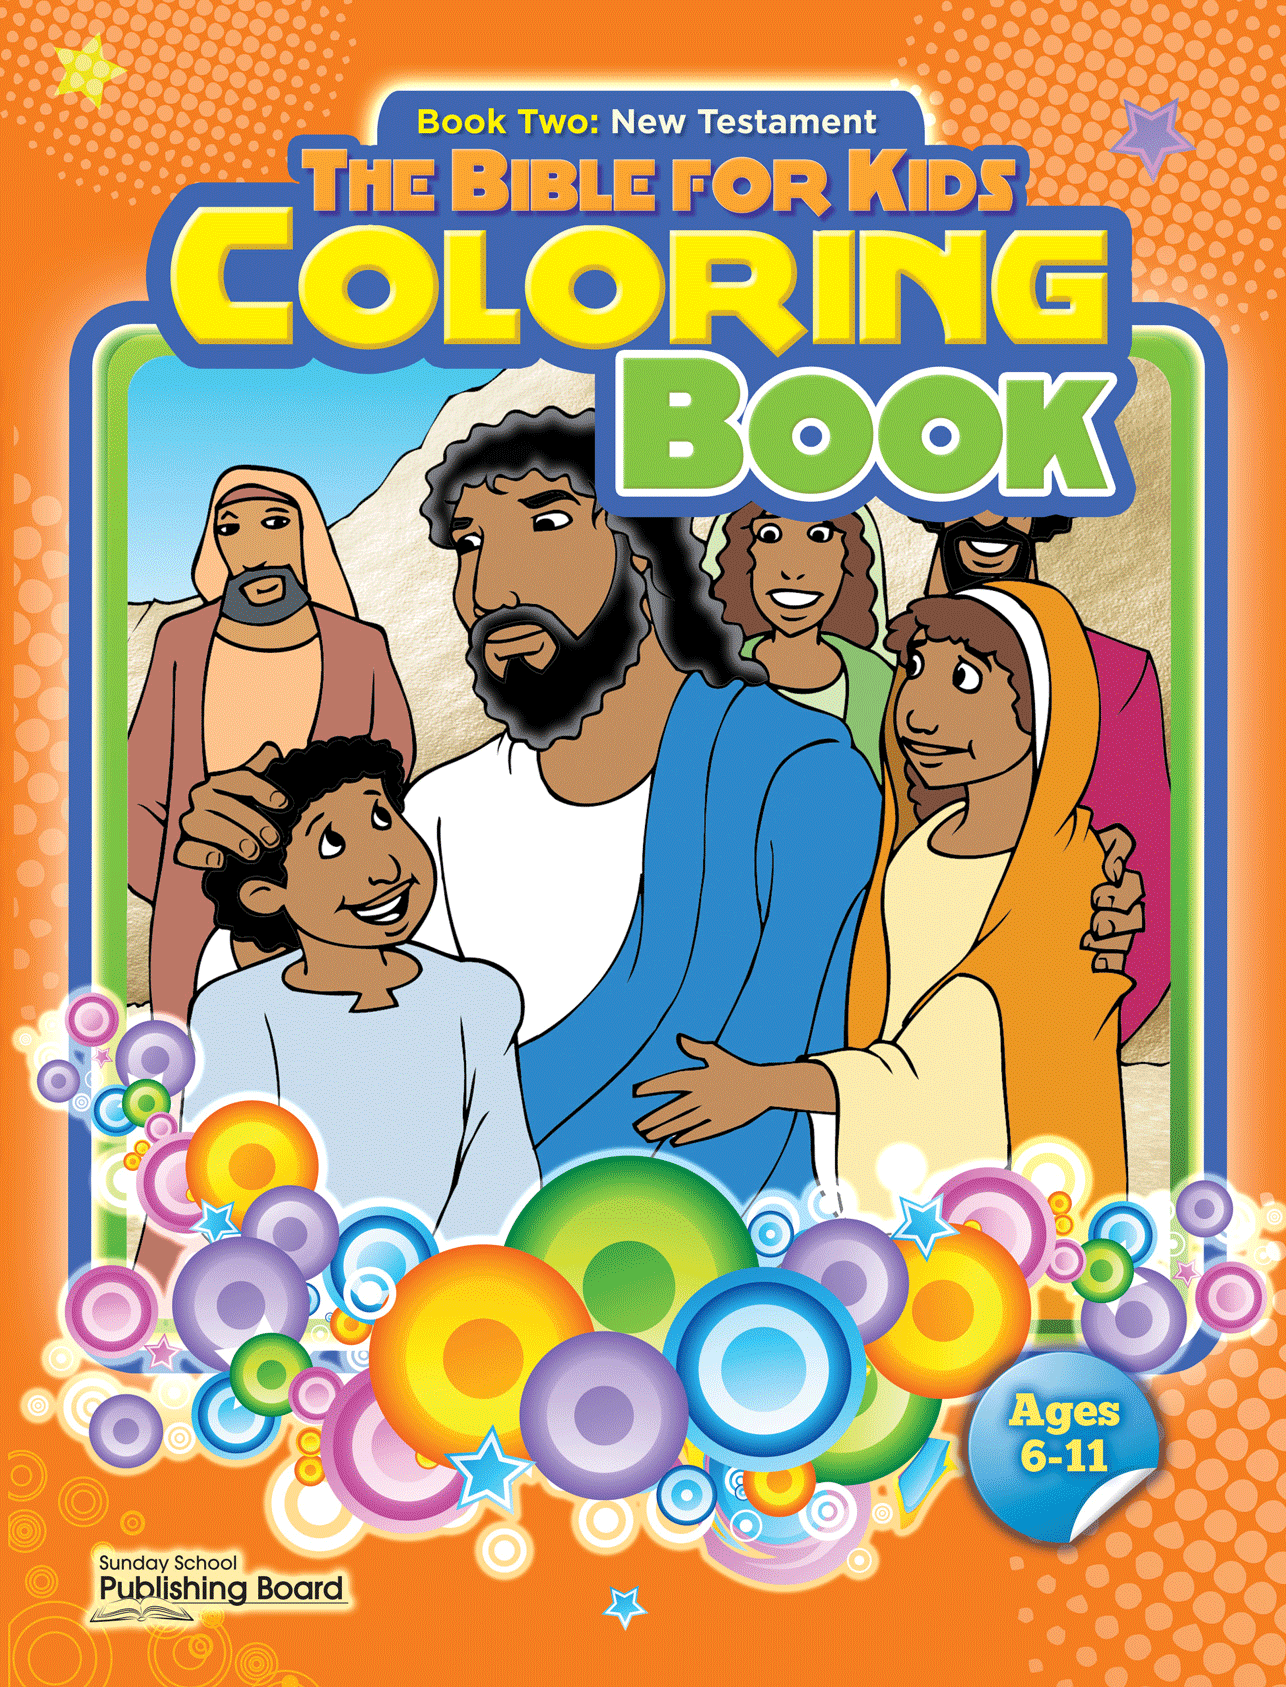 bible story coloring pages for toddlers